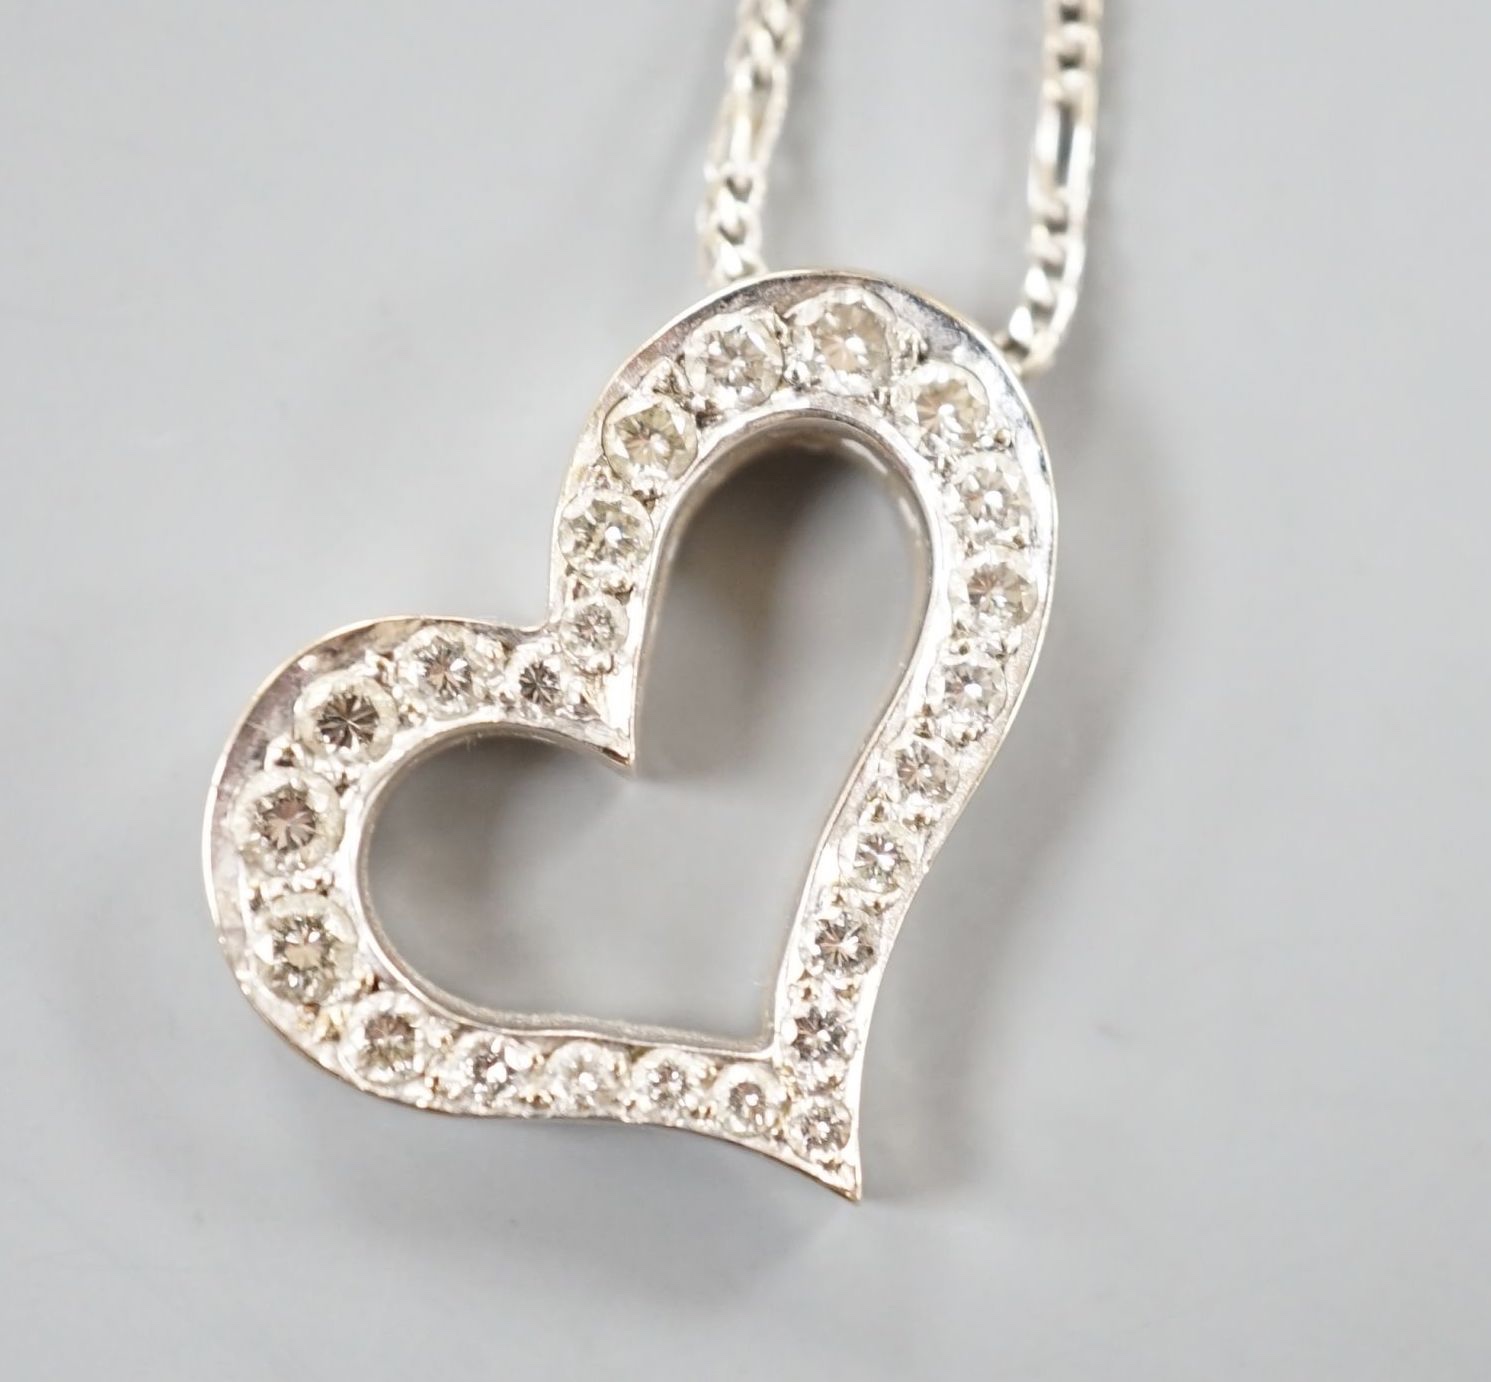 A modern 750 white metal and diamond set openwork heart pendant necklace, pendant width 22mm, chain, 40cm